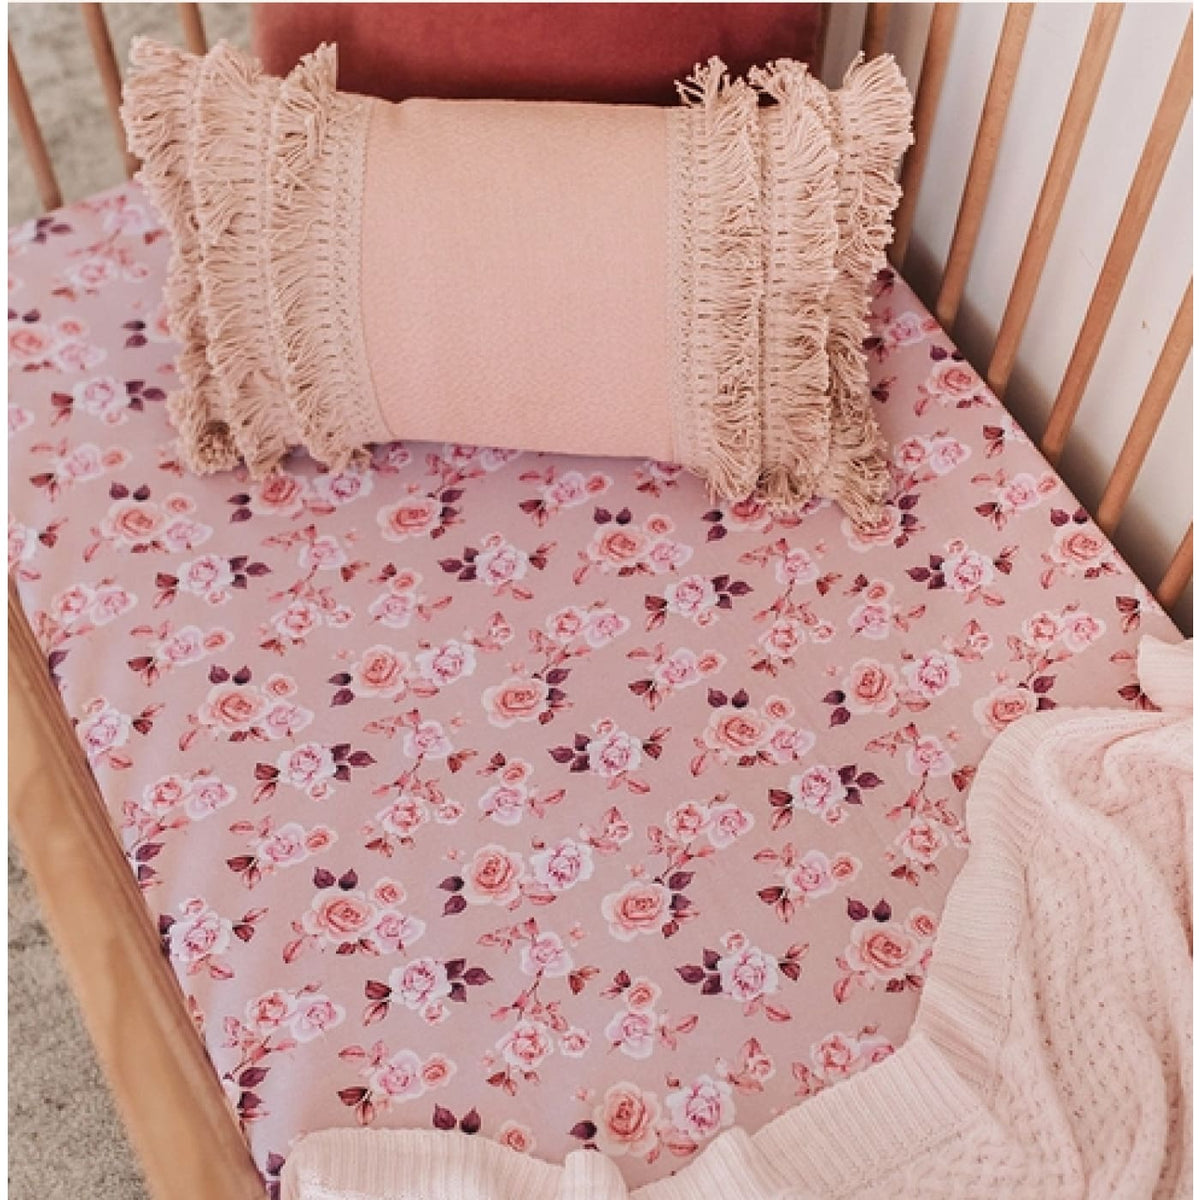 Snuggle Hunny Kids Fitted Cot Sheet - Blossom - Blossom - NURSERY &amp; BEDTIME - COT MANCHESTER